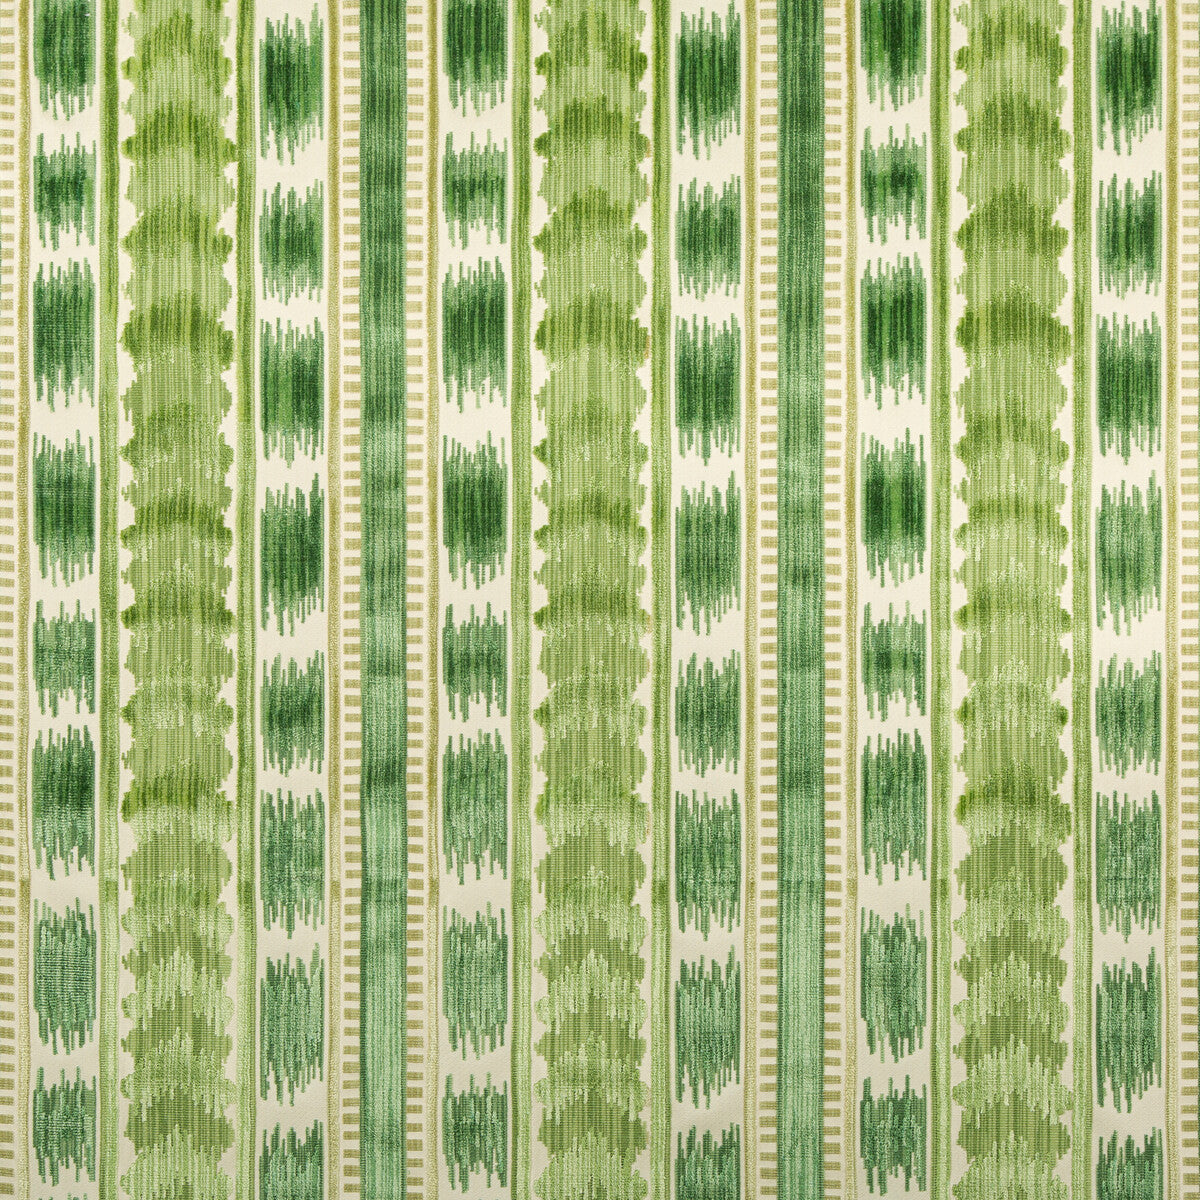 Bayeaux Velvet fabric in fern color - pattern 8020117.303.0 - by Brunschwig &amp; Fils in the Chaumont Velvets collection